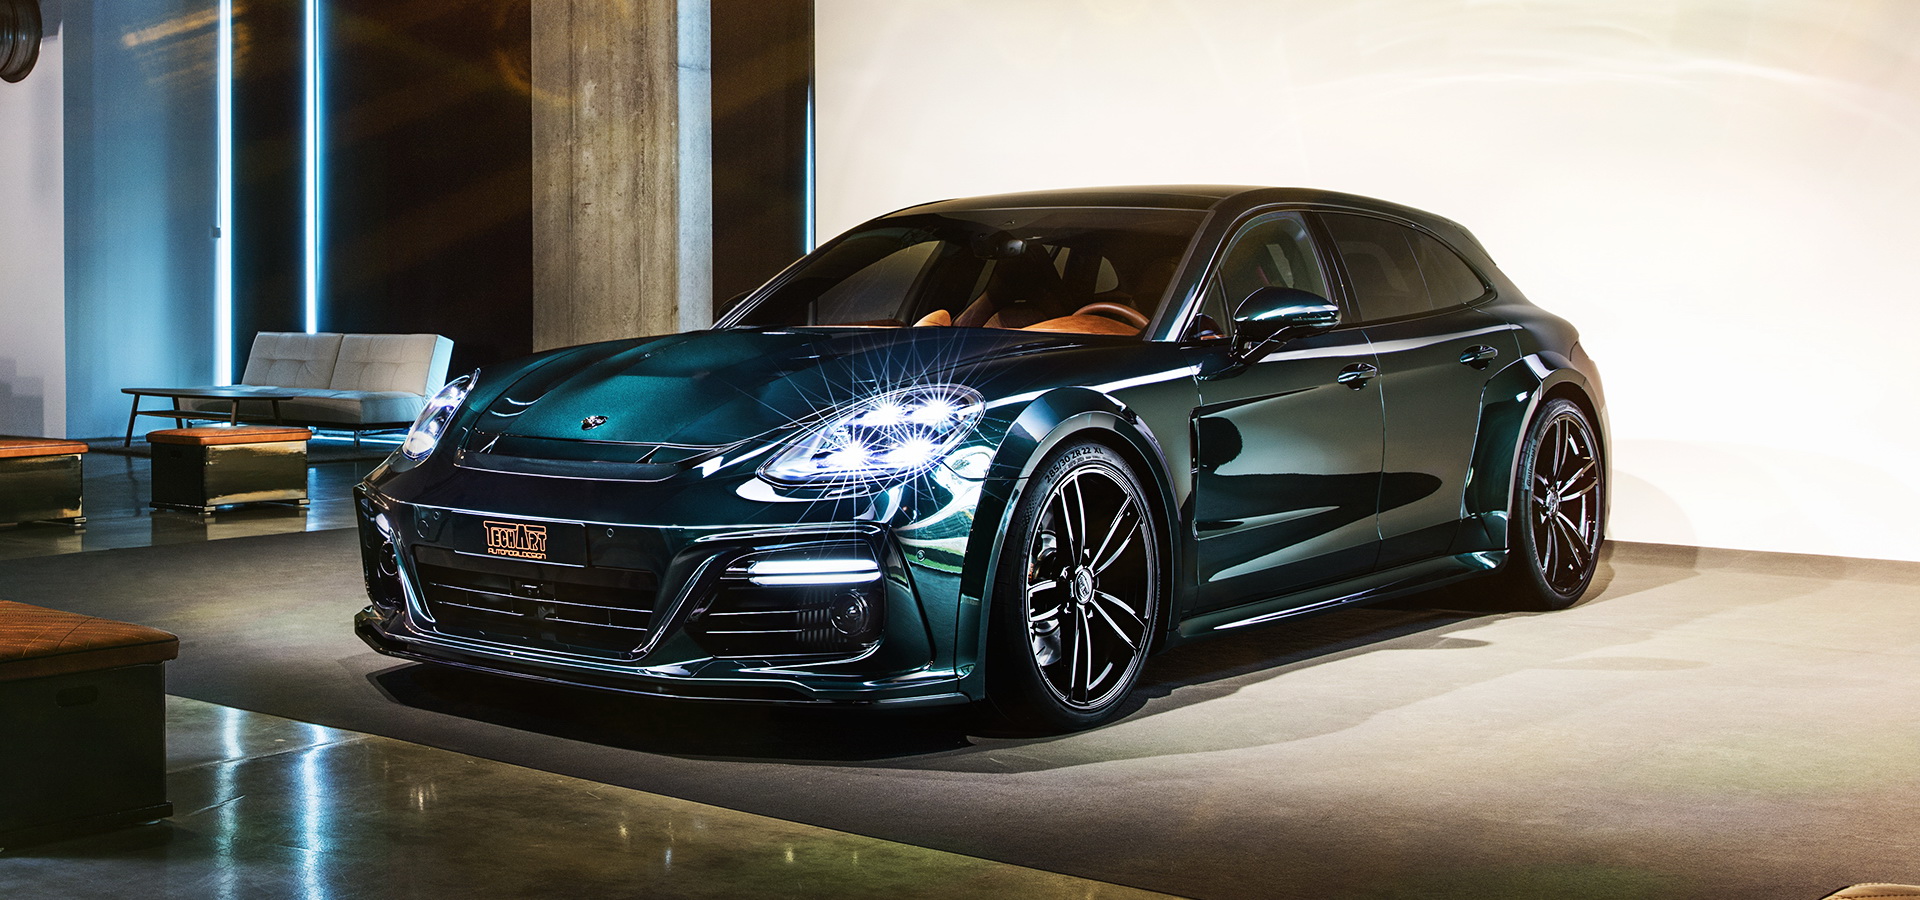 Would You Rather Have TechArt Or Mansory Style Your Panamera Sport Turismo? | Carscoops1920 x 900